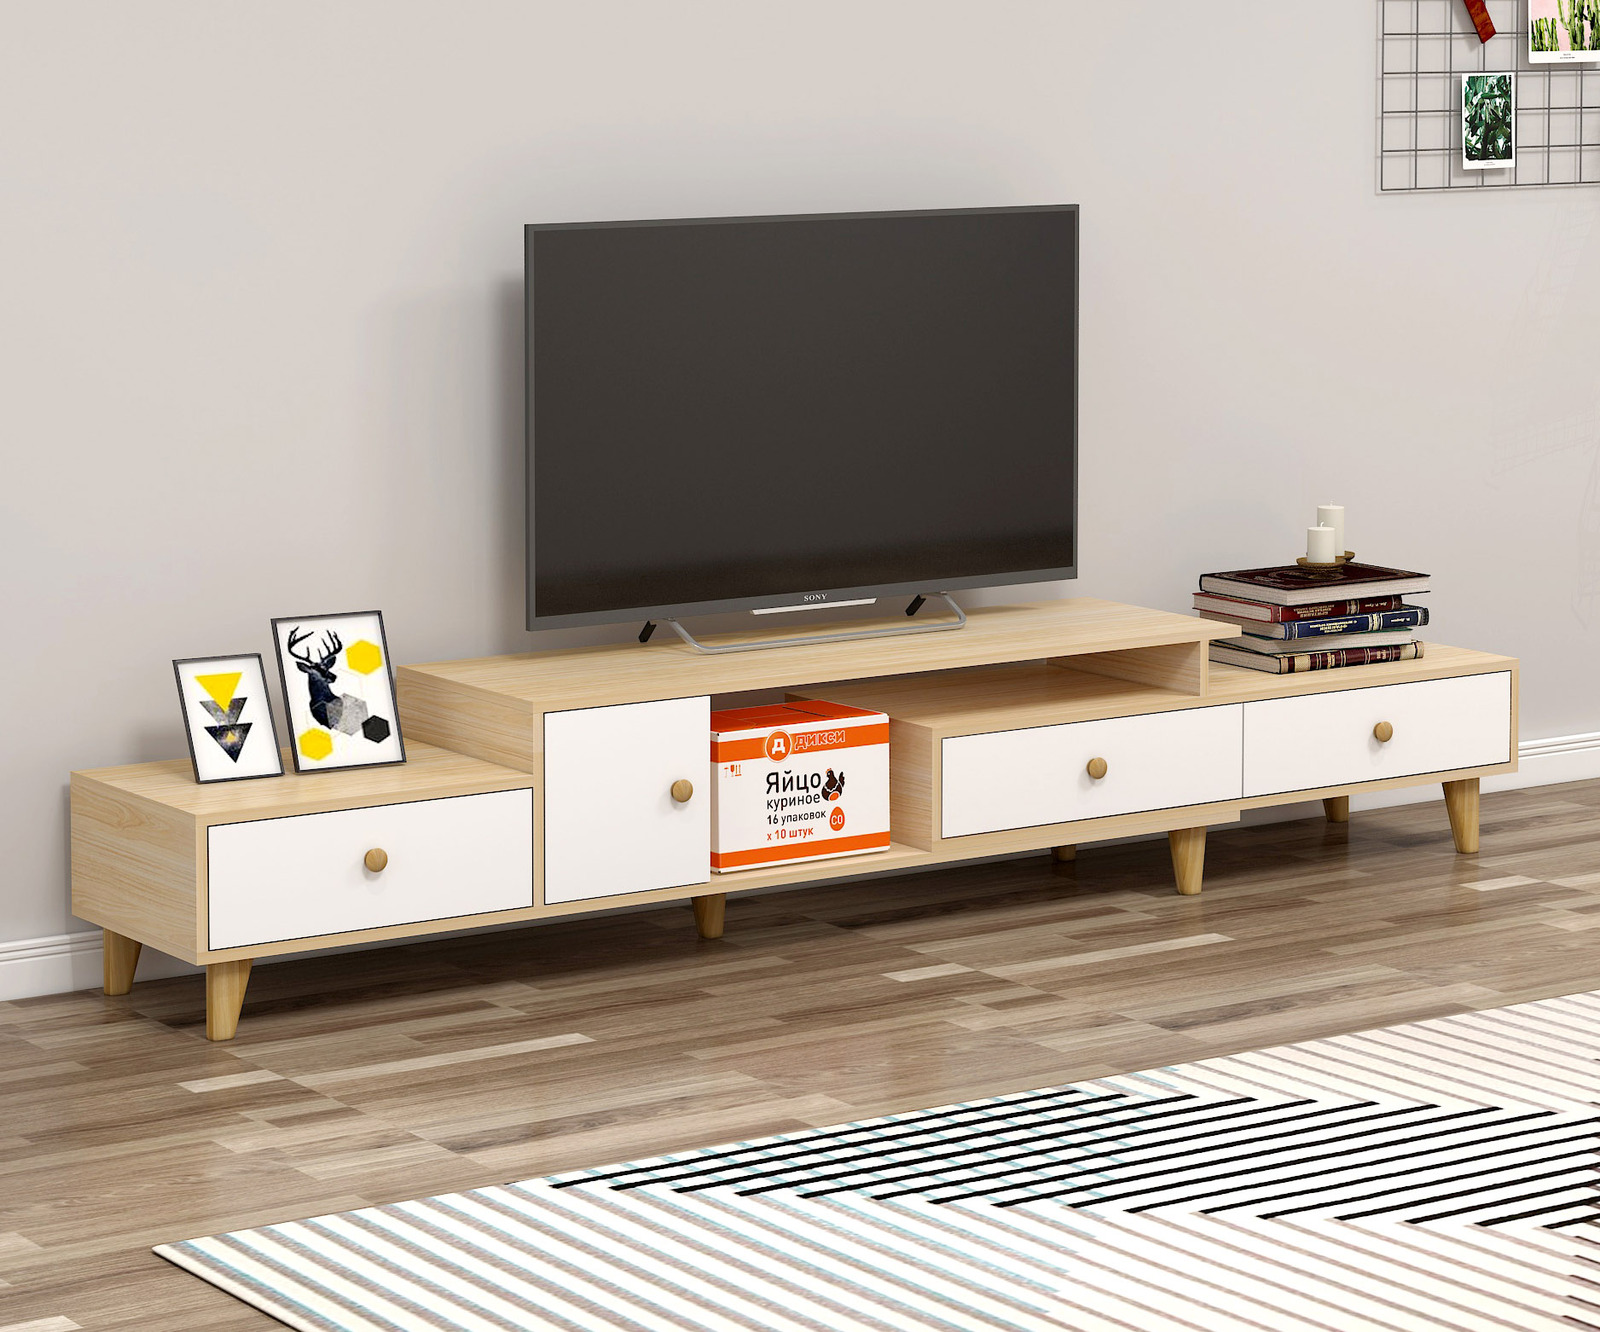 Deluxe Unity Wooden TV Cabinet Entertainment Unit with Drawers